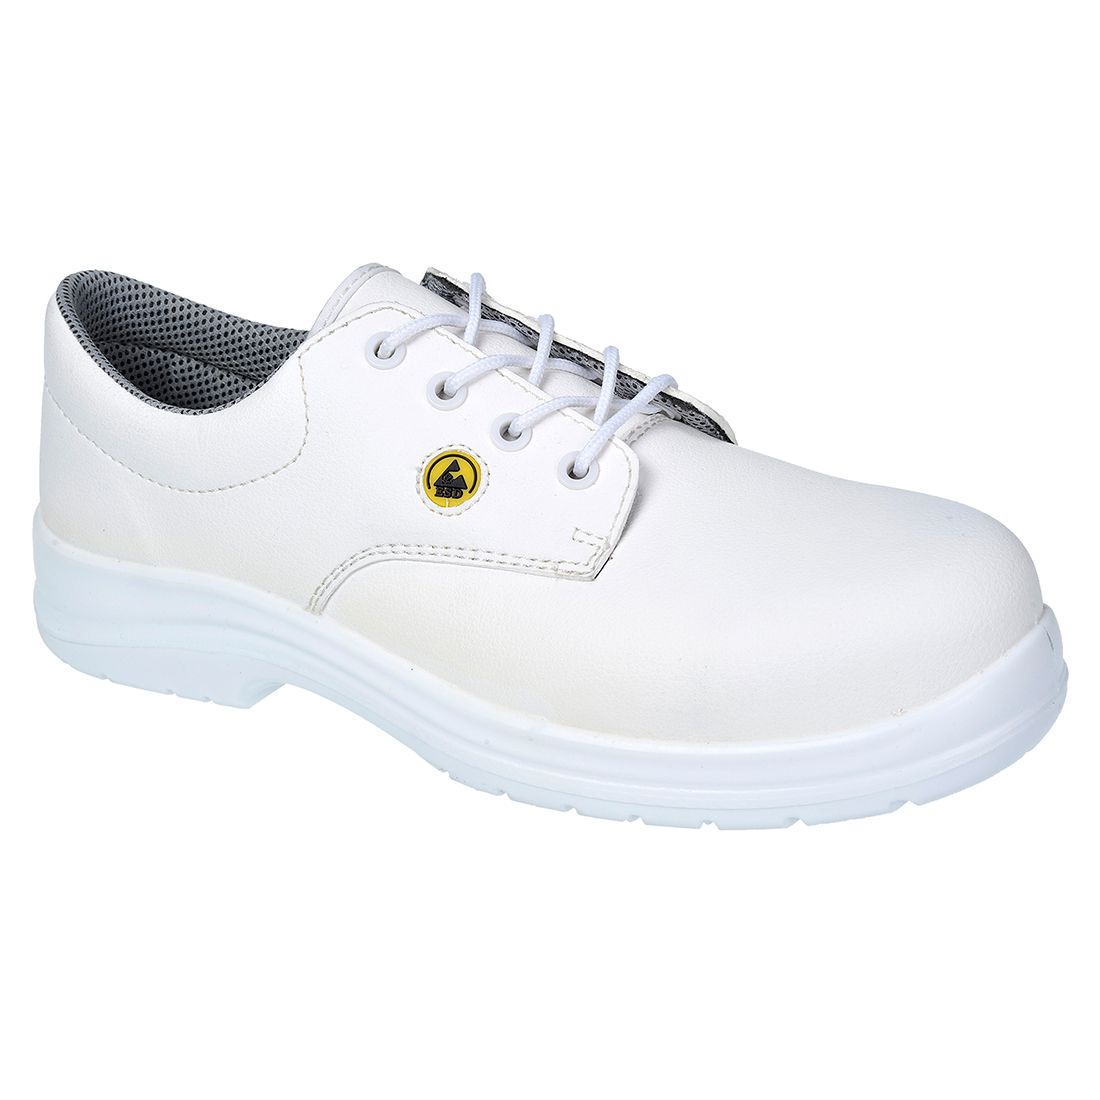 Portwest Compositelite ESD Laced Safety Shoe S2 Size 37 White